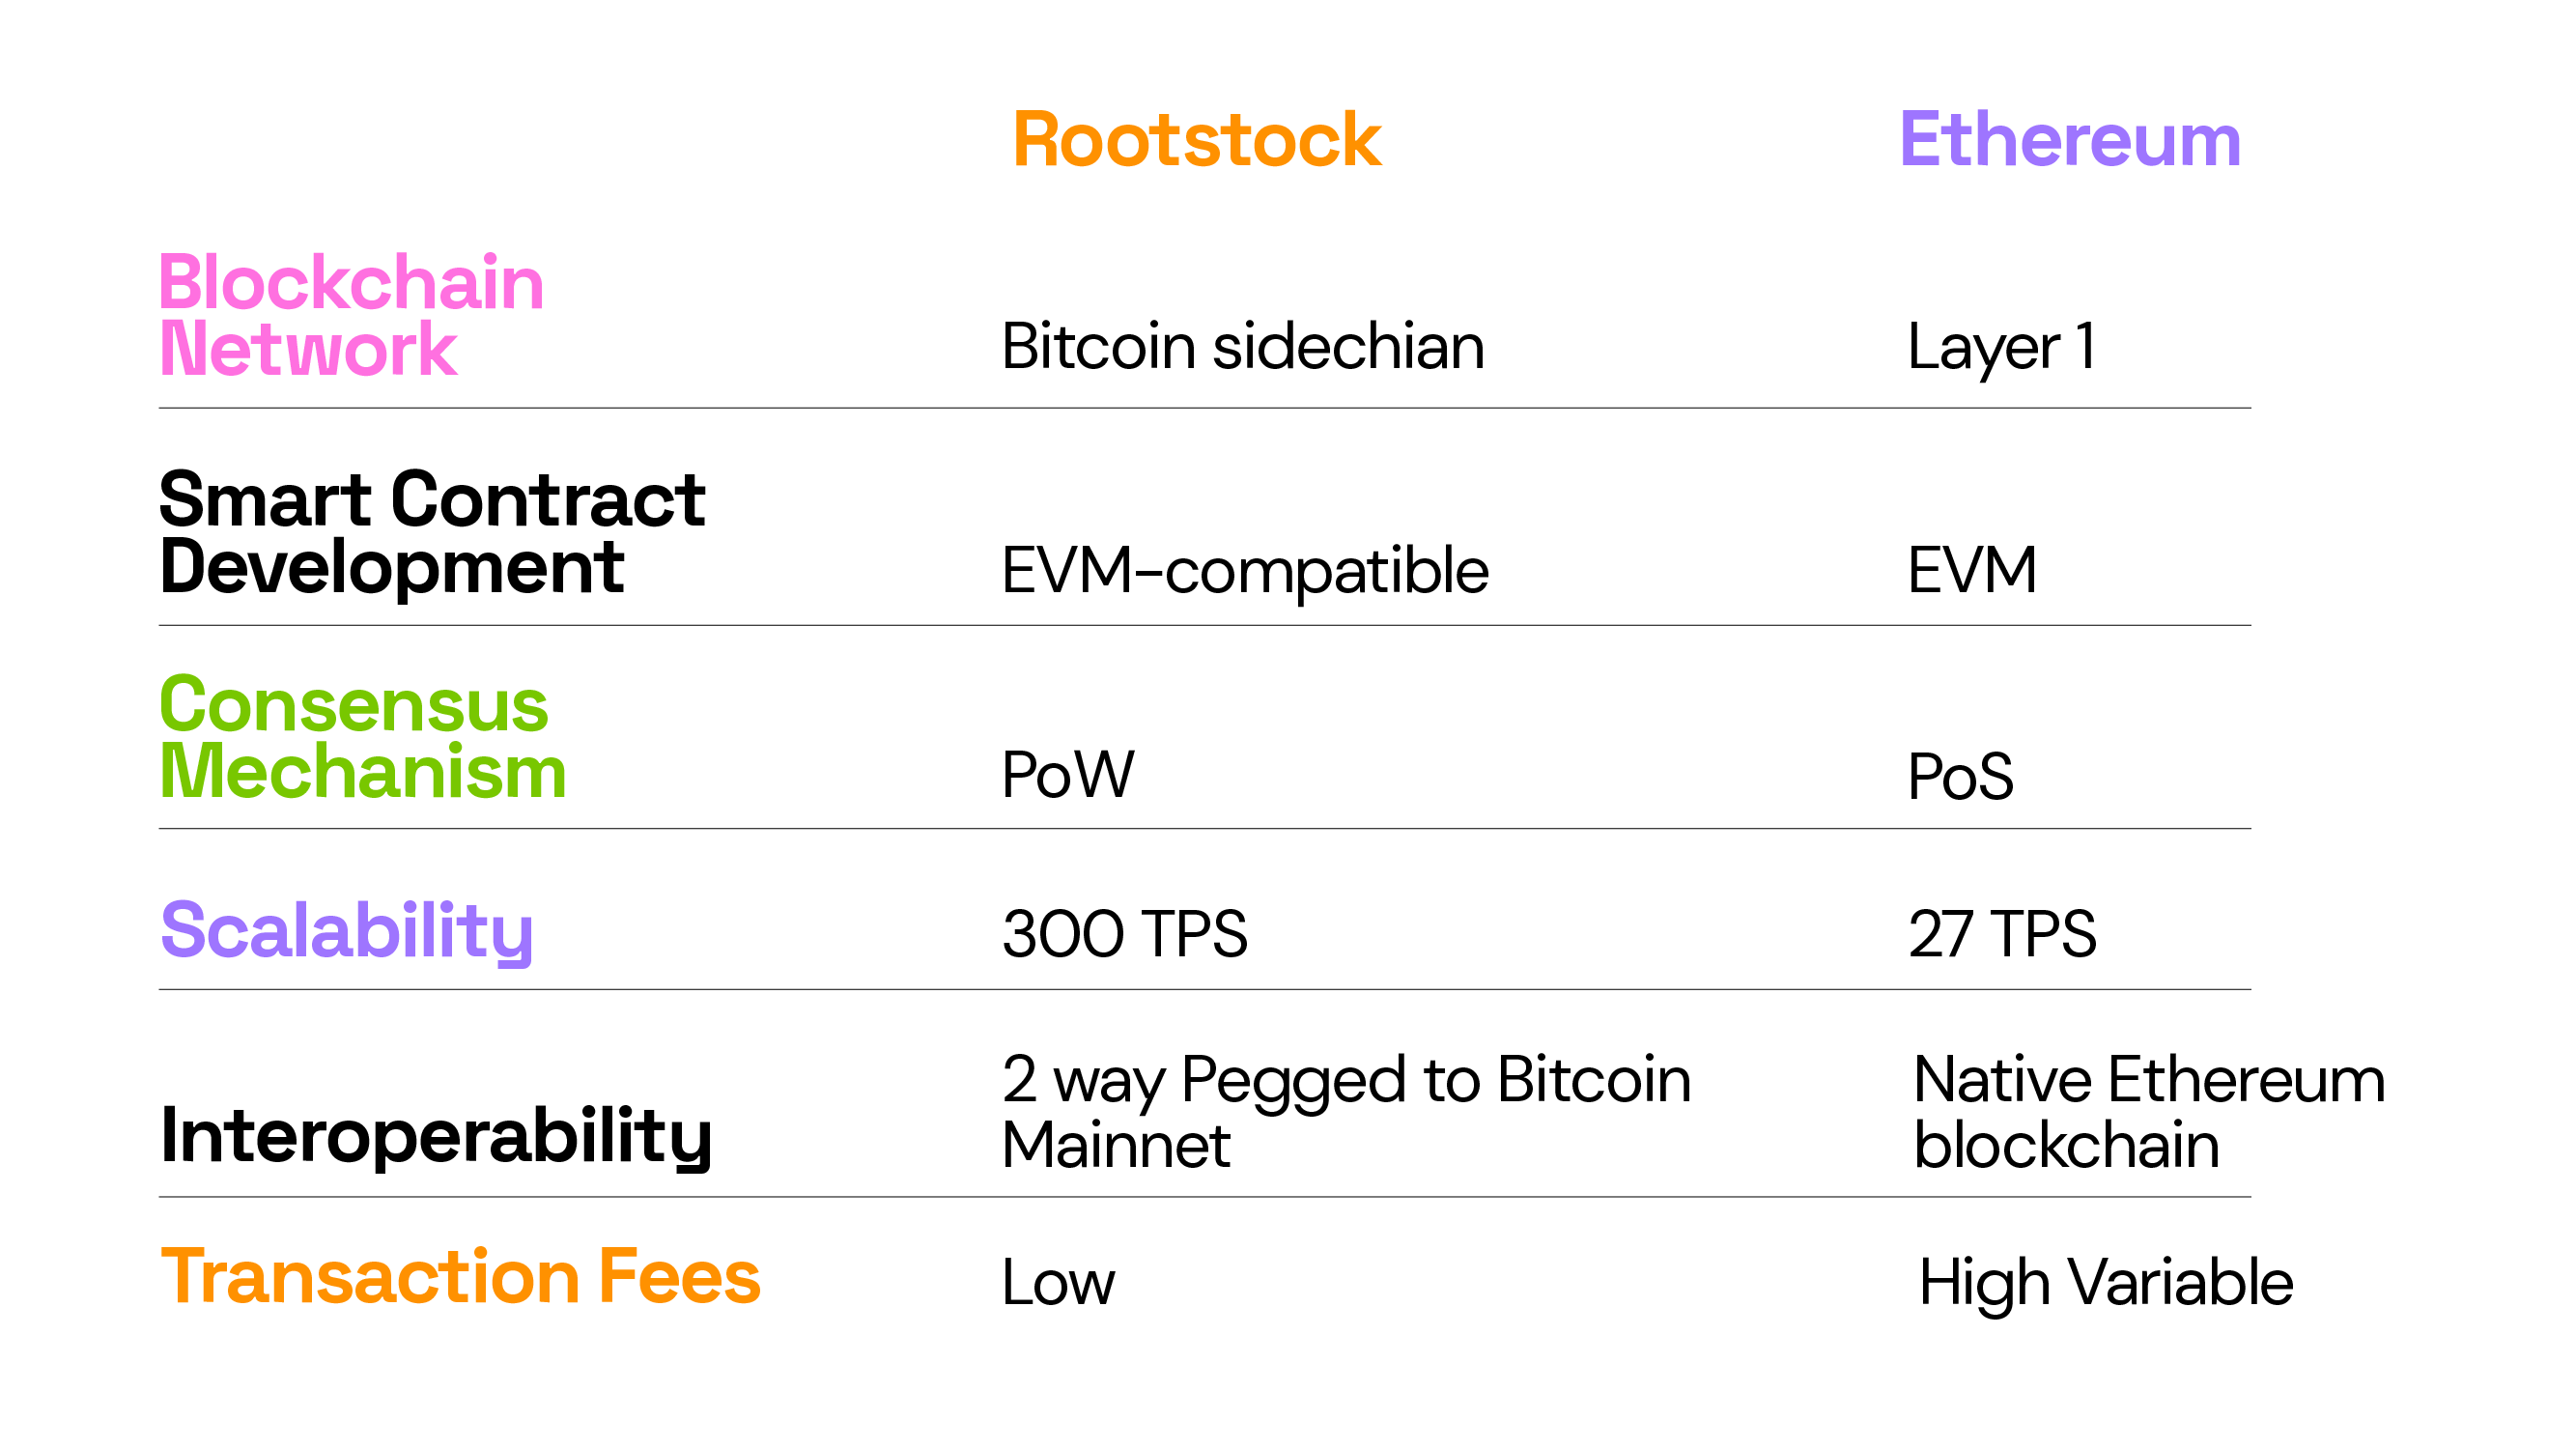 https://blog.rootstock.io/noticia/rootstock-vs-ethereum-why-more-developers-are-choosing-to-build-on-rootstock/